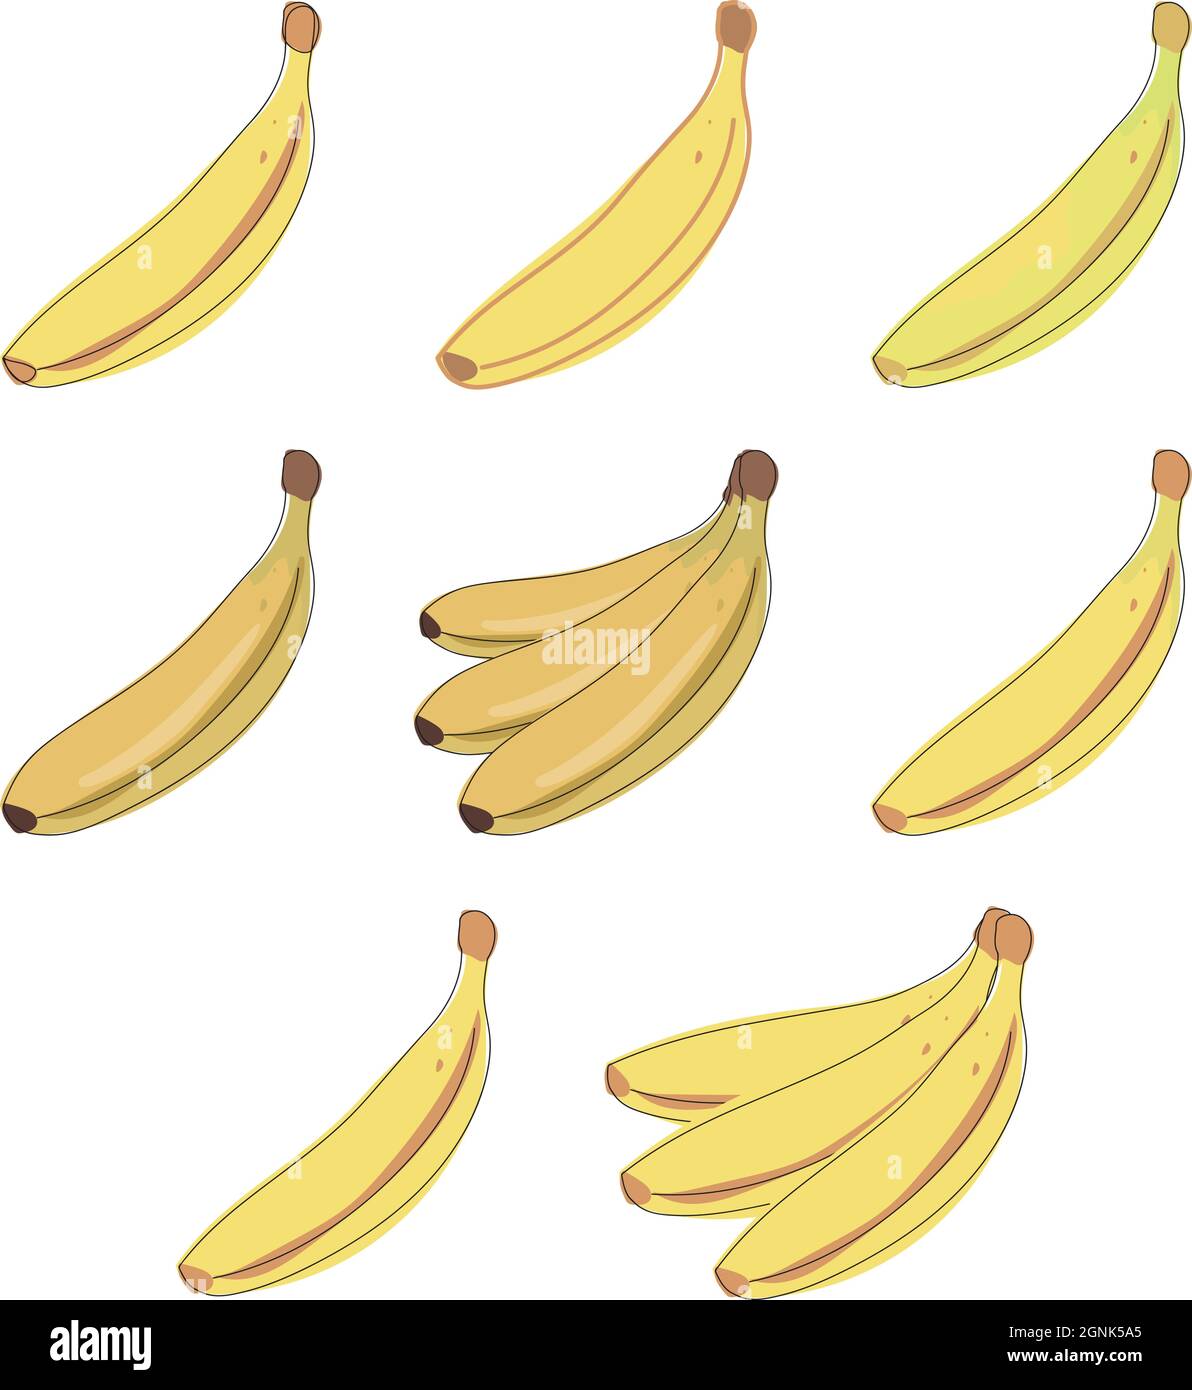 https://c8.alamy.com/comp/2GNK5A5/vector-banana-bunches-of-fresh-banana-fruits-isolated-on-white-background-collection-of-vector-illustrations-2GNK5A5.jpg